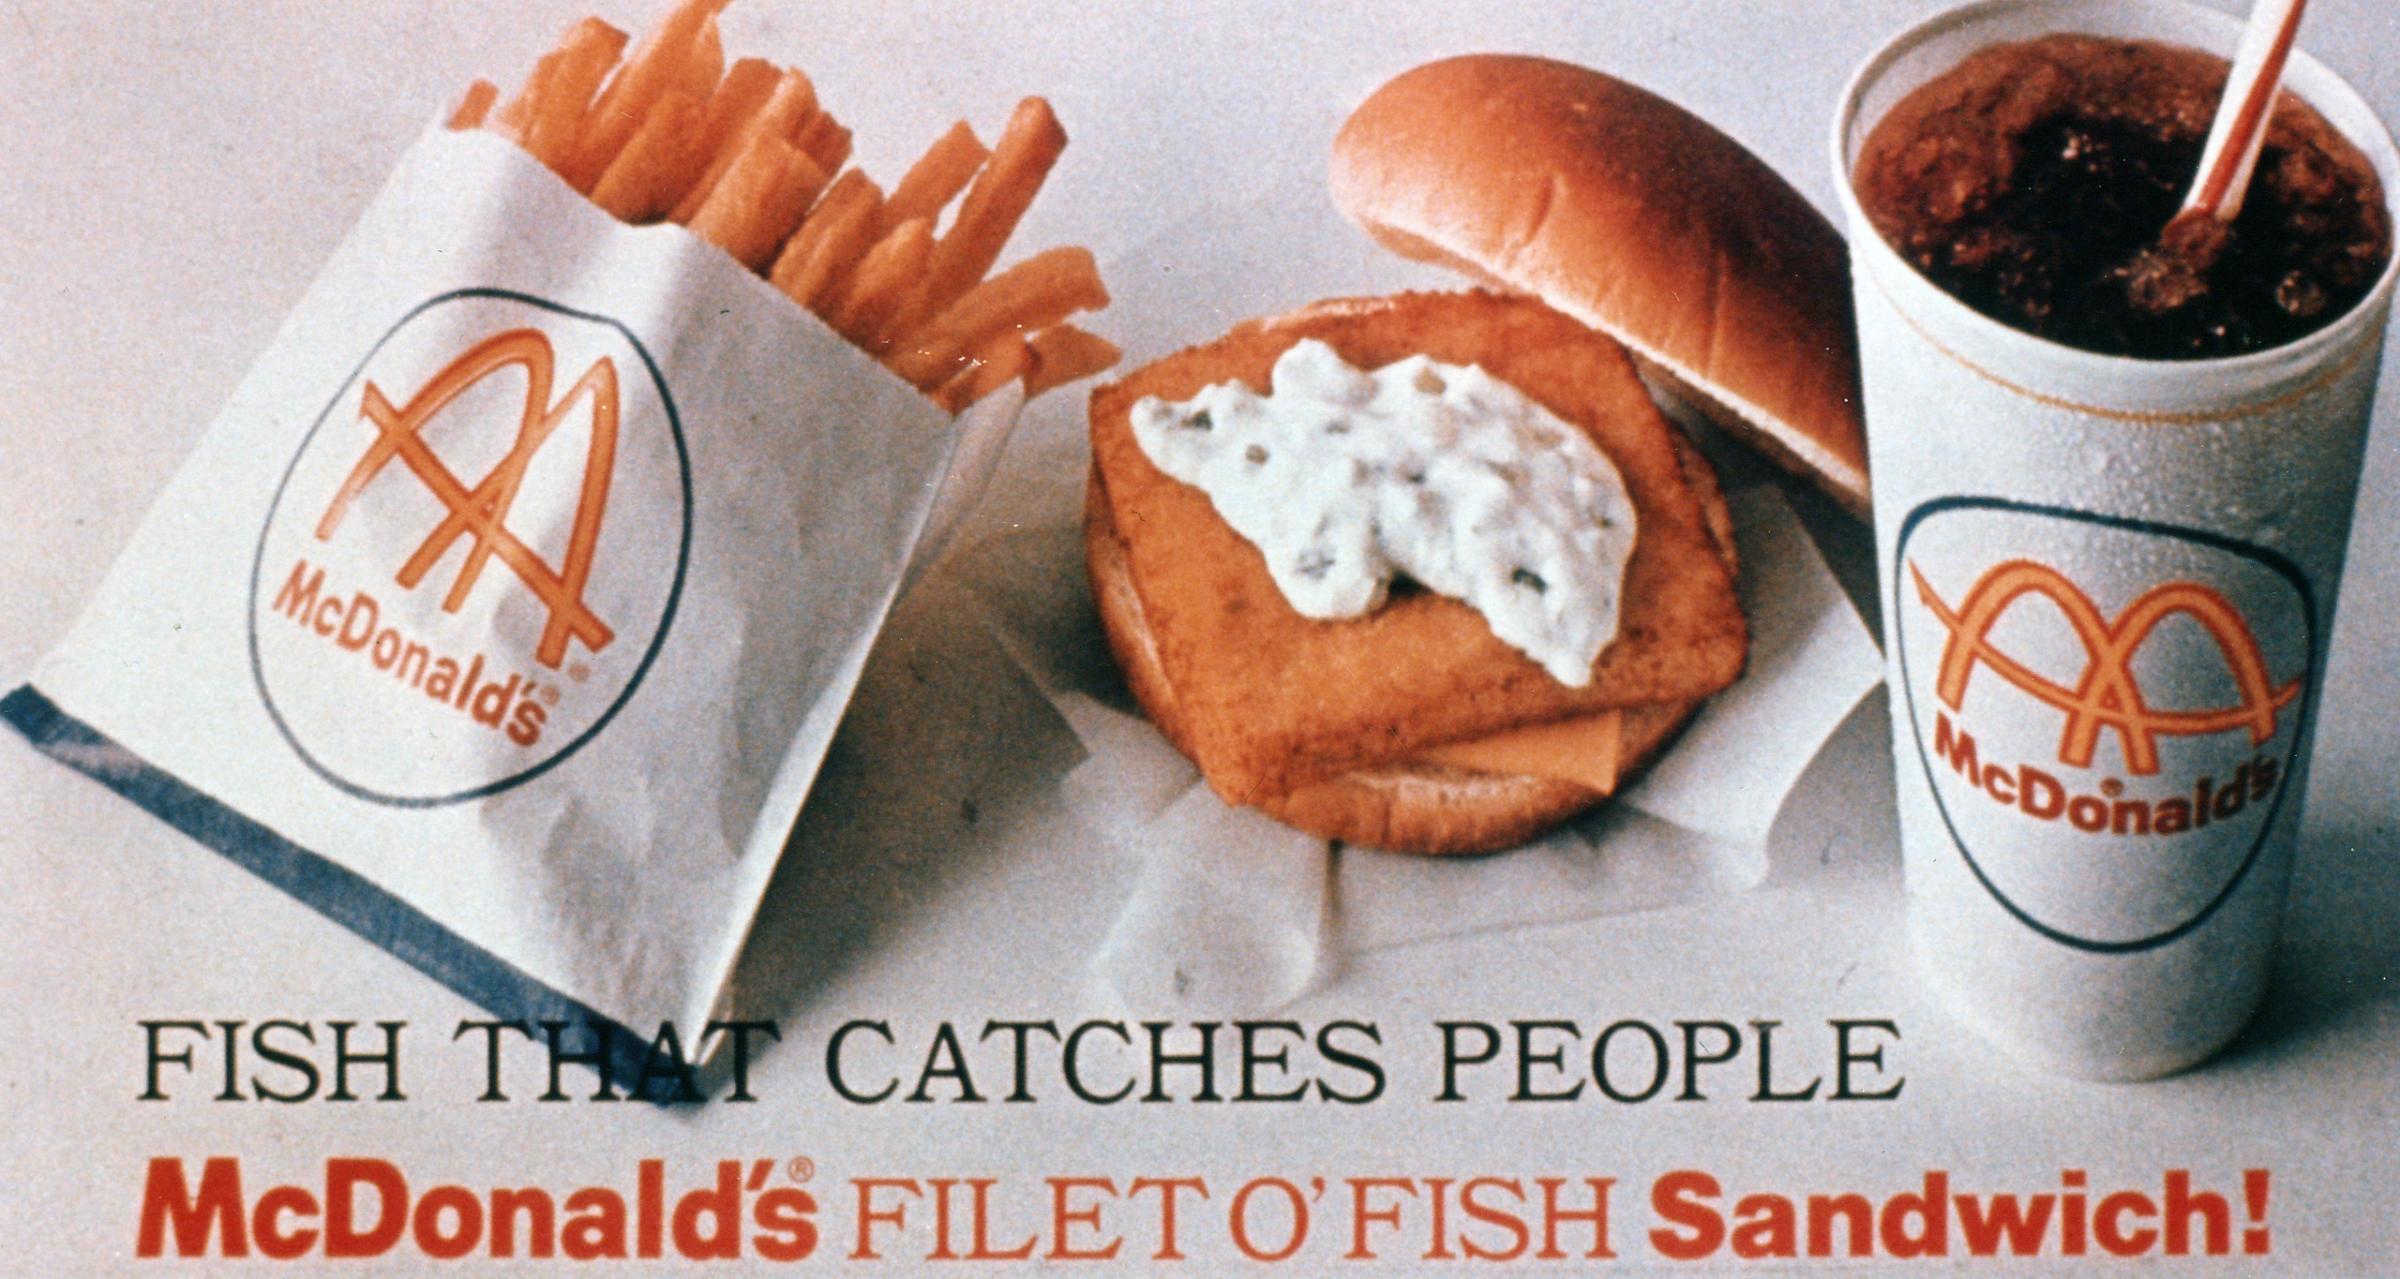 The Filet-O-Fish Sandwich is the First New Item Added to the McDonald's Menu in 1965.